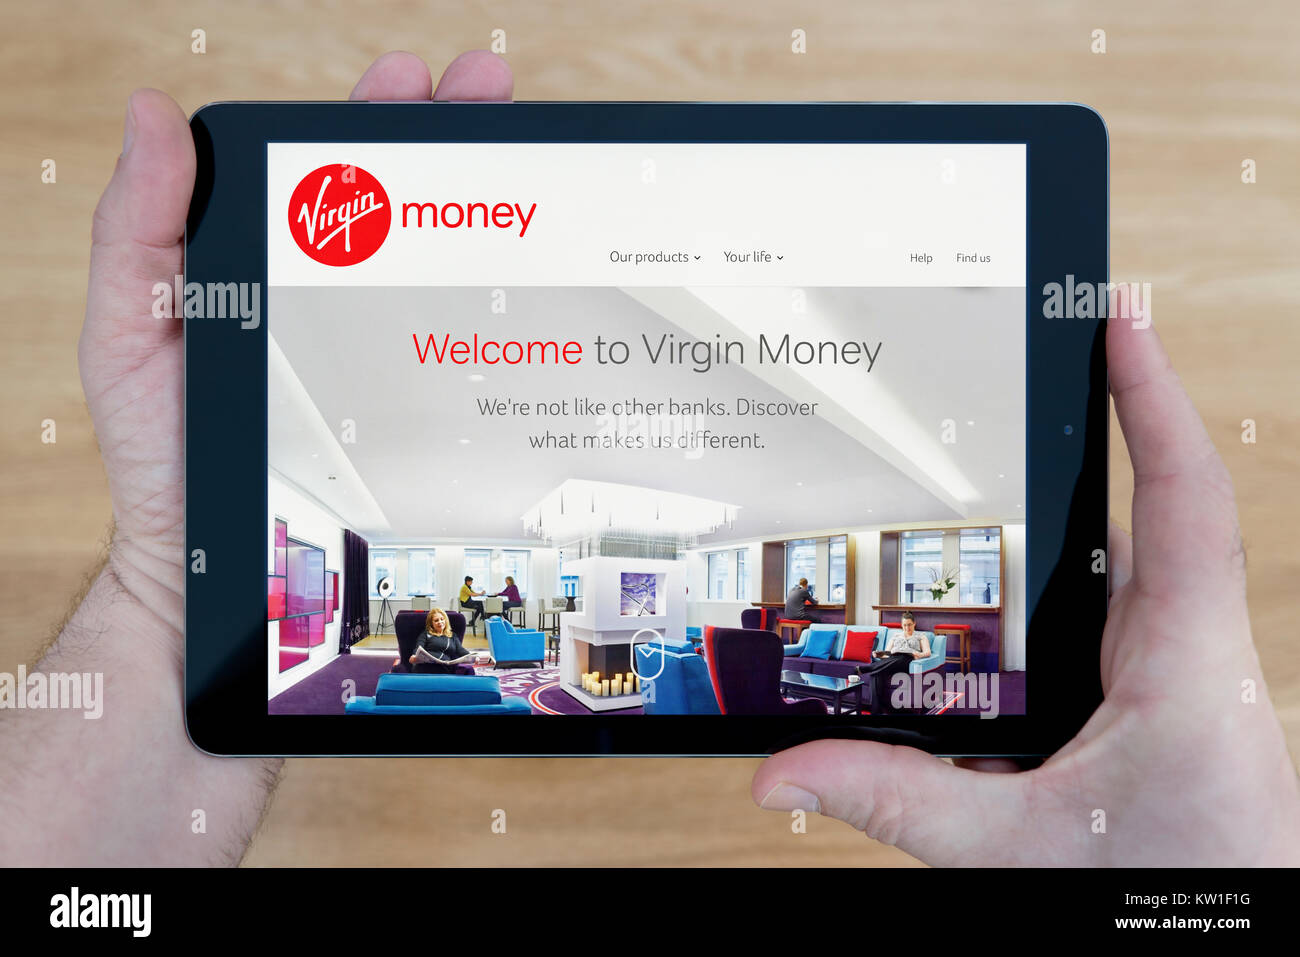 A man looks at the Virgin Money website on his iPad tablet device, shot against a wooden table top background (Editorial use only) Stock Photo